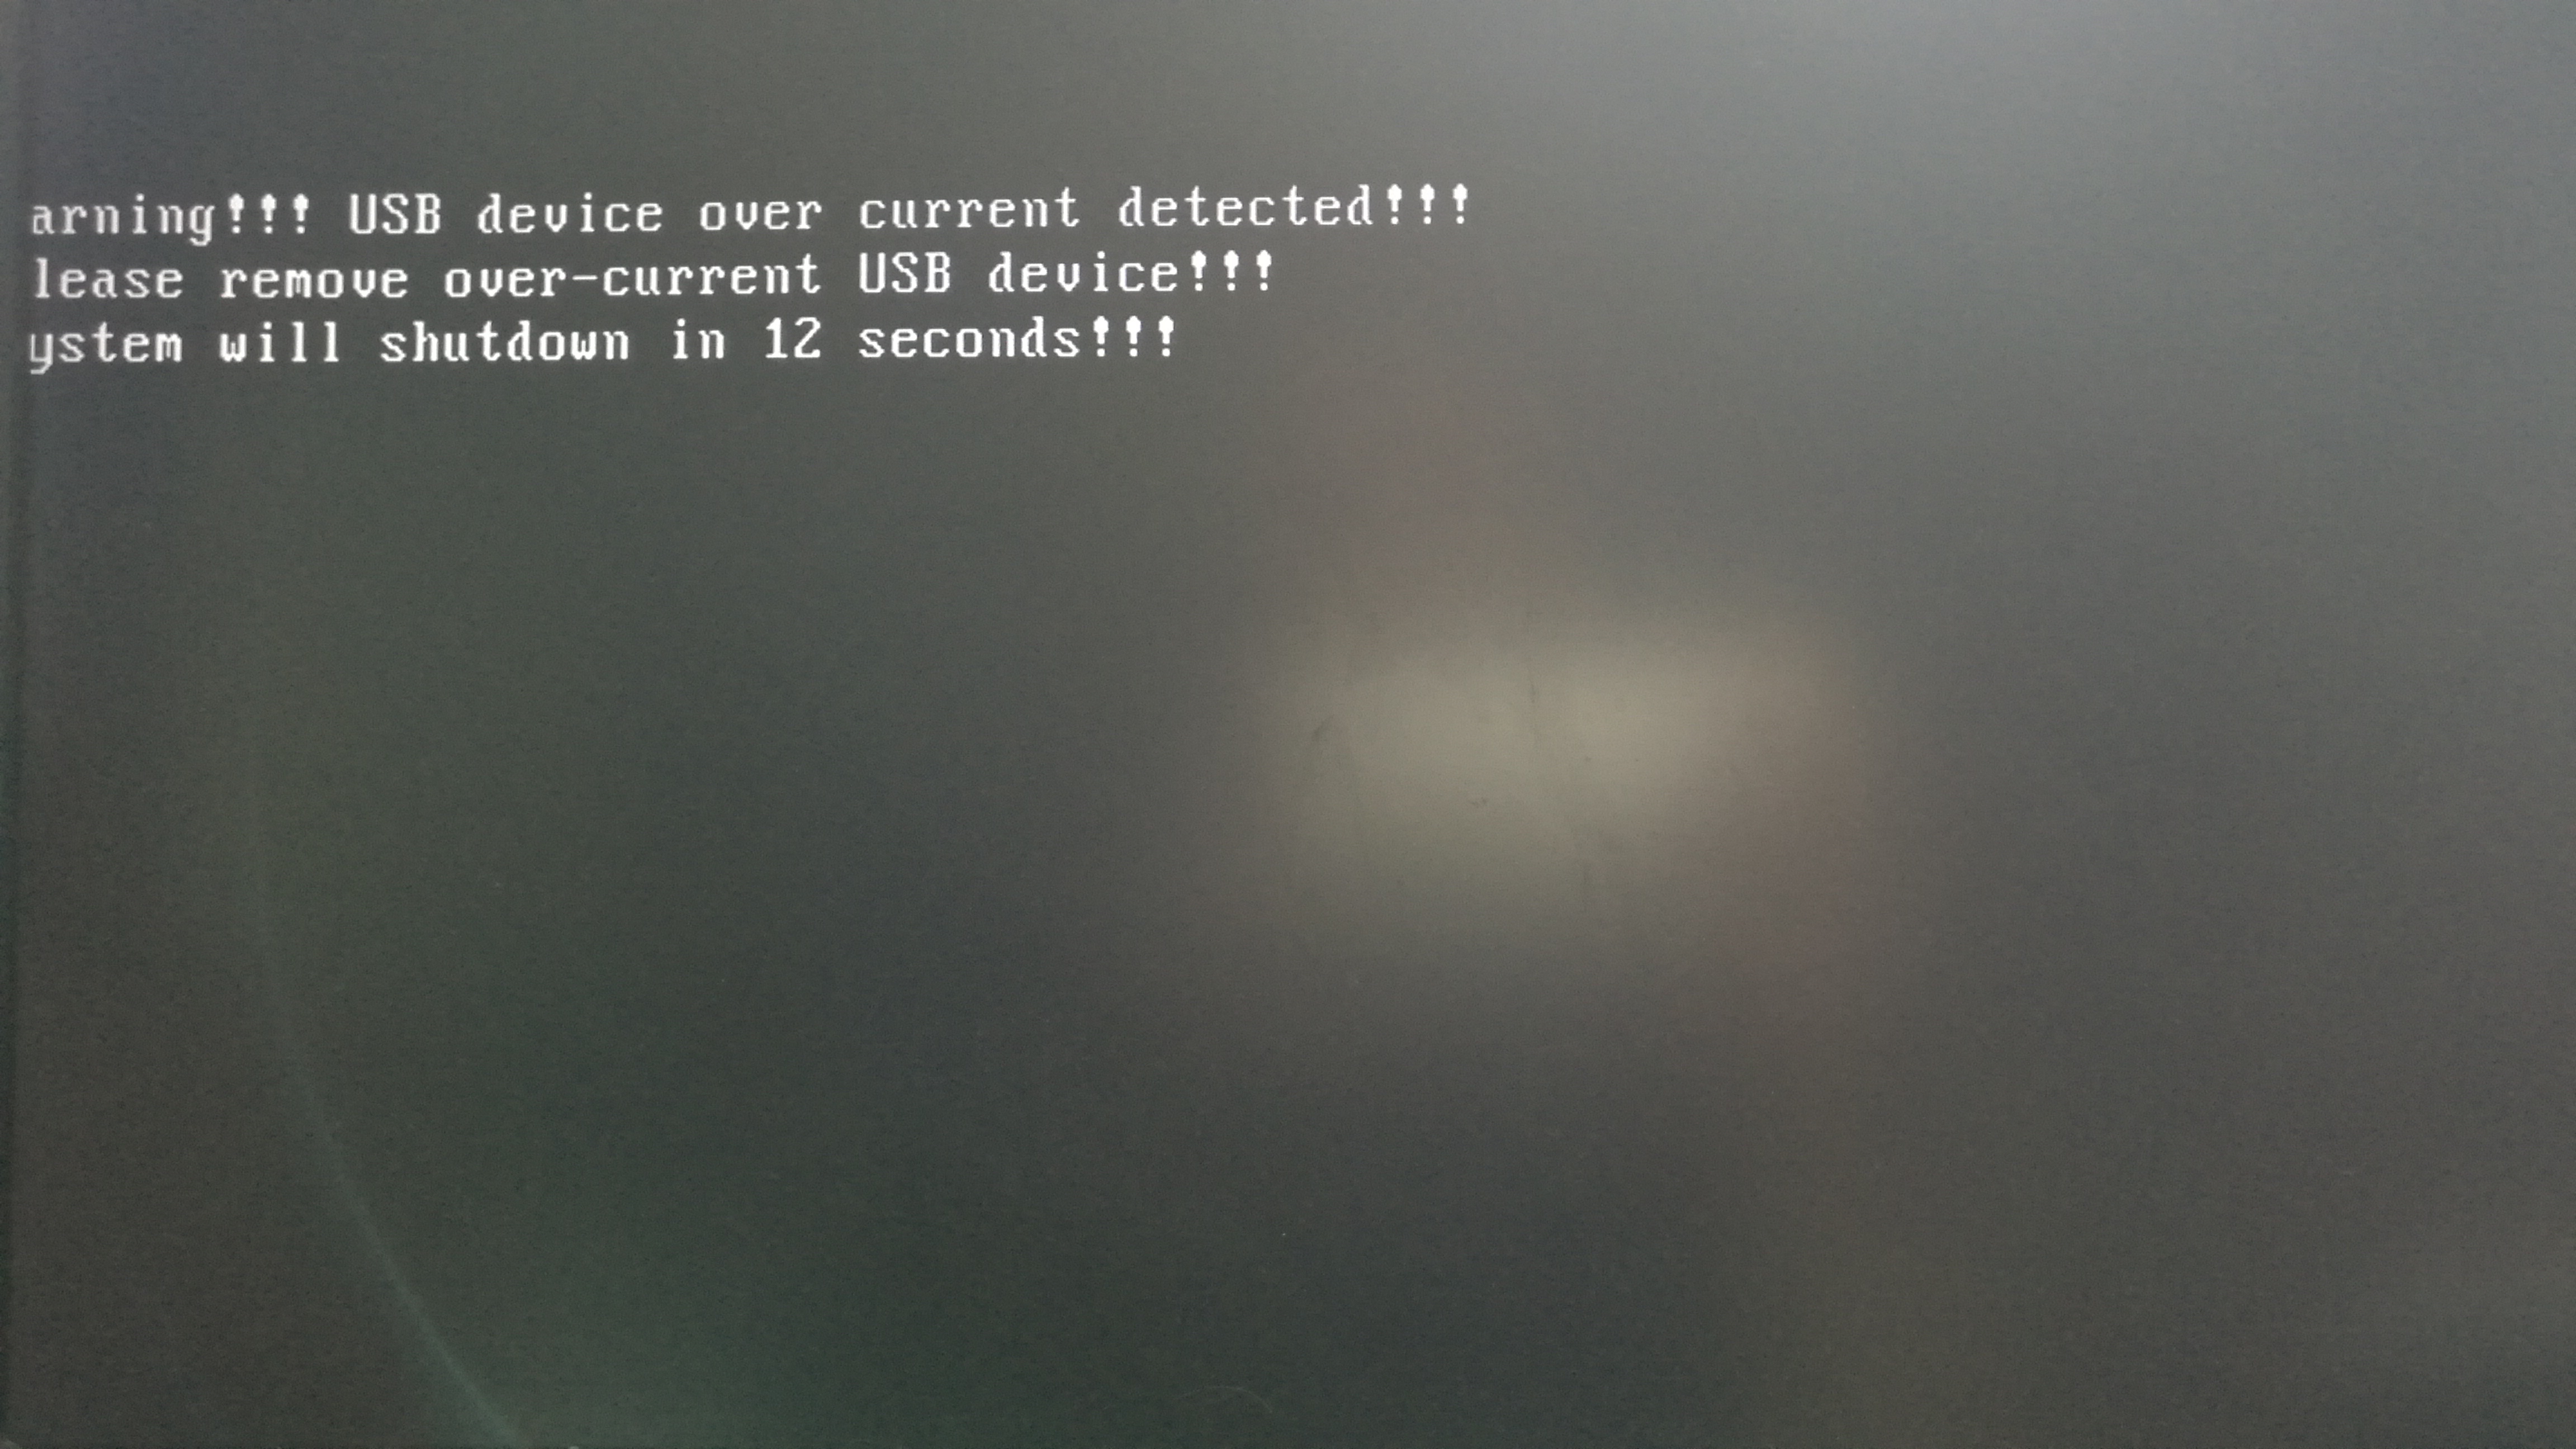 Over current status detected. USB device over current status detected.